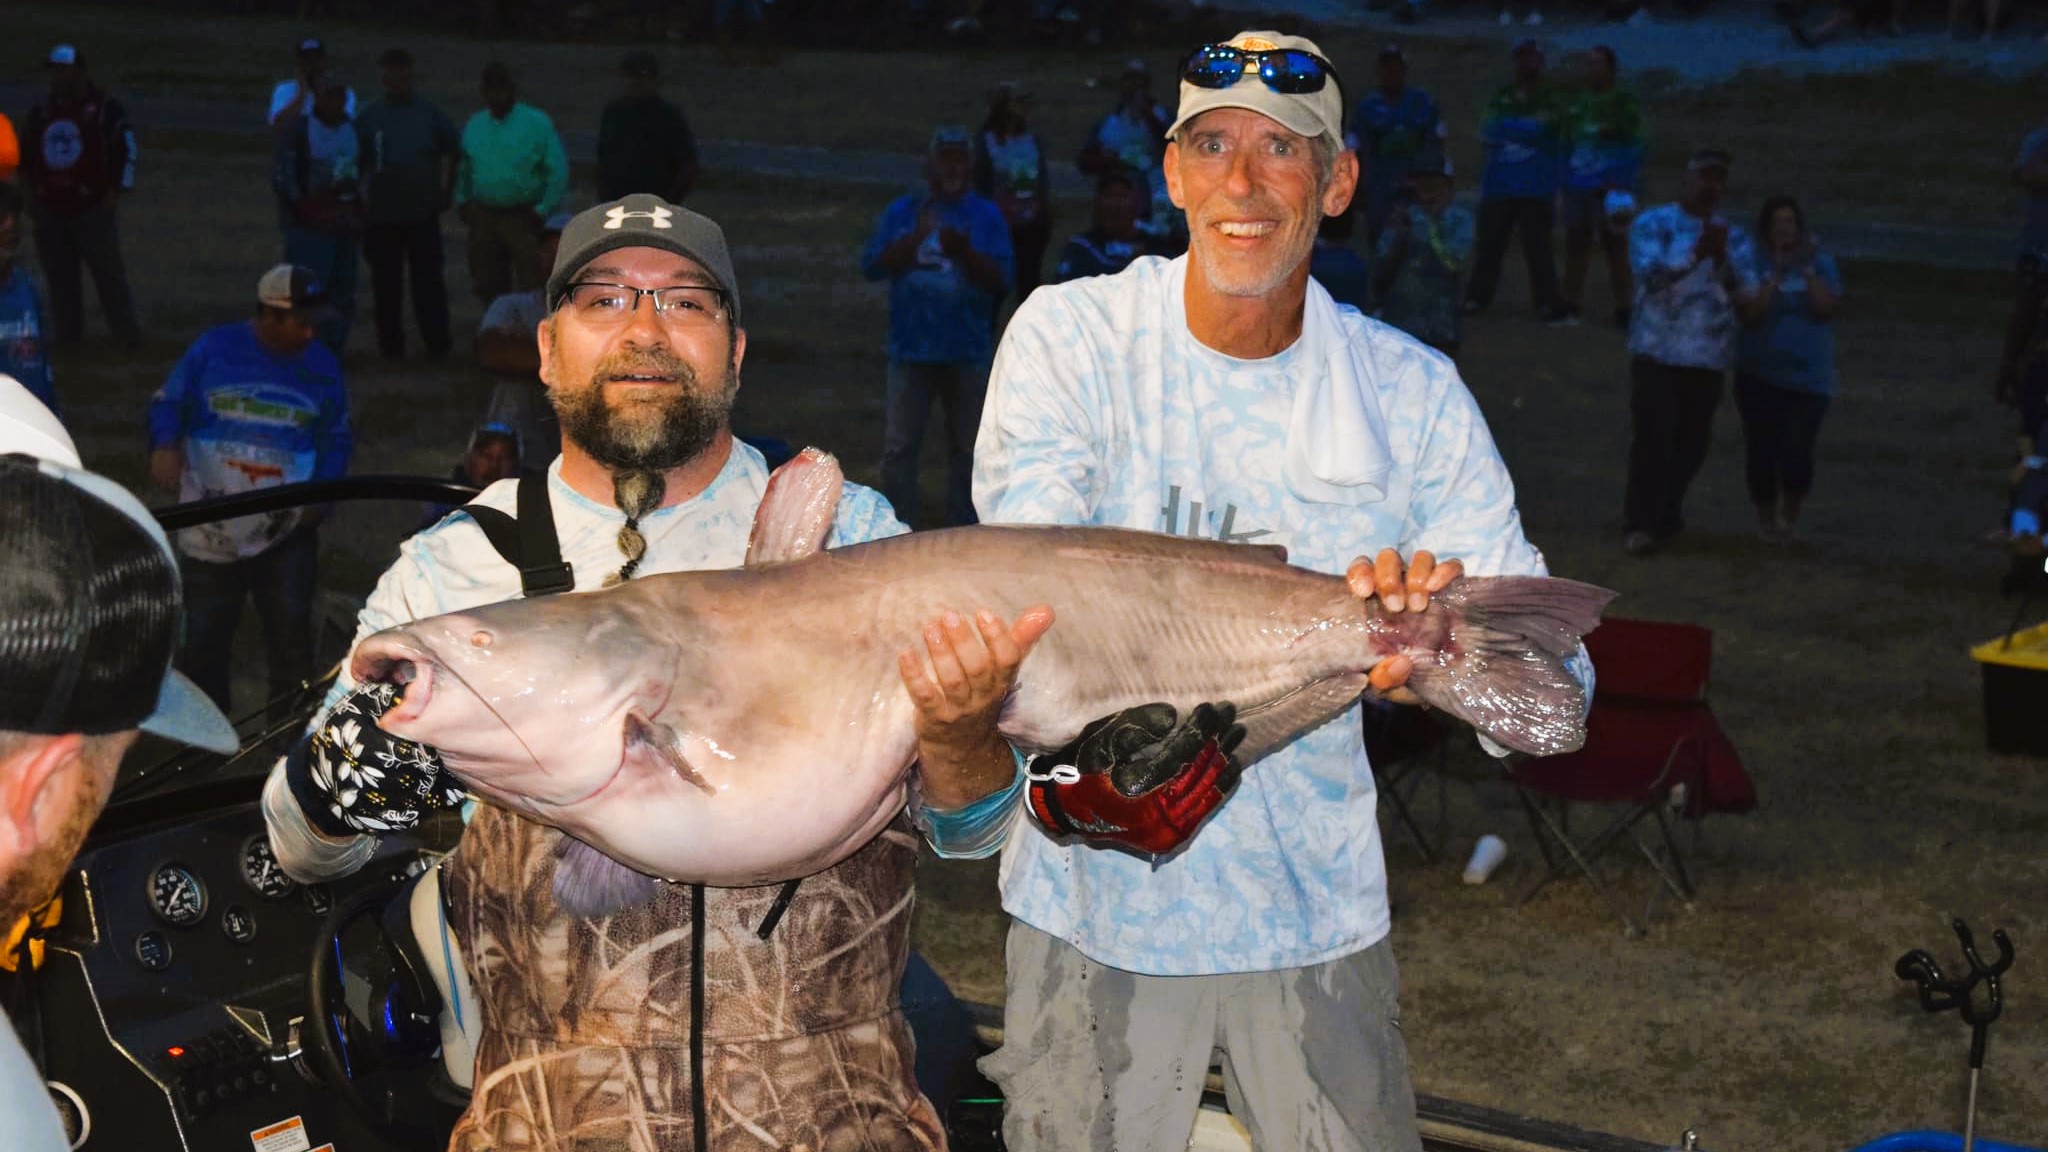 intermediate, catfish, tournament, Mississippi River Monsters, MRM, Vicksburg, MS, Mississippi River, Big Muddy, bumping, anchoring, current, skipjack, George Young Jr., Larry Muse, Chris Stout, Hunter Jones, Dino Meador, Larry Spillers, Chris Tramm, Brian Vohol, Andy Williams, Rhys Eubank, Don Fisher